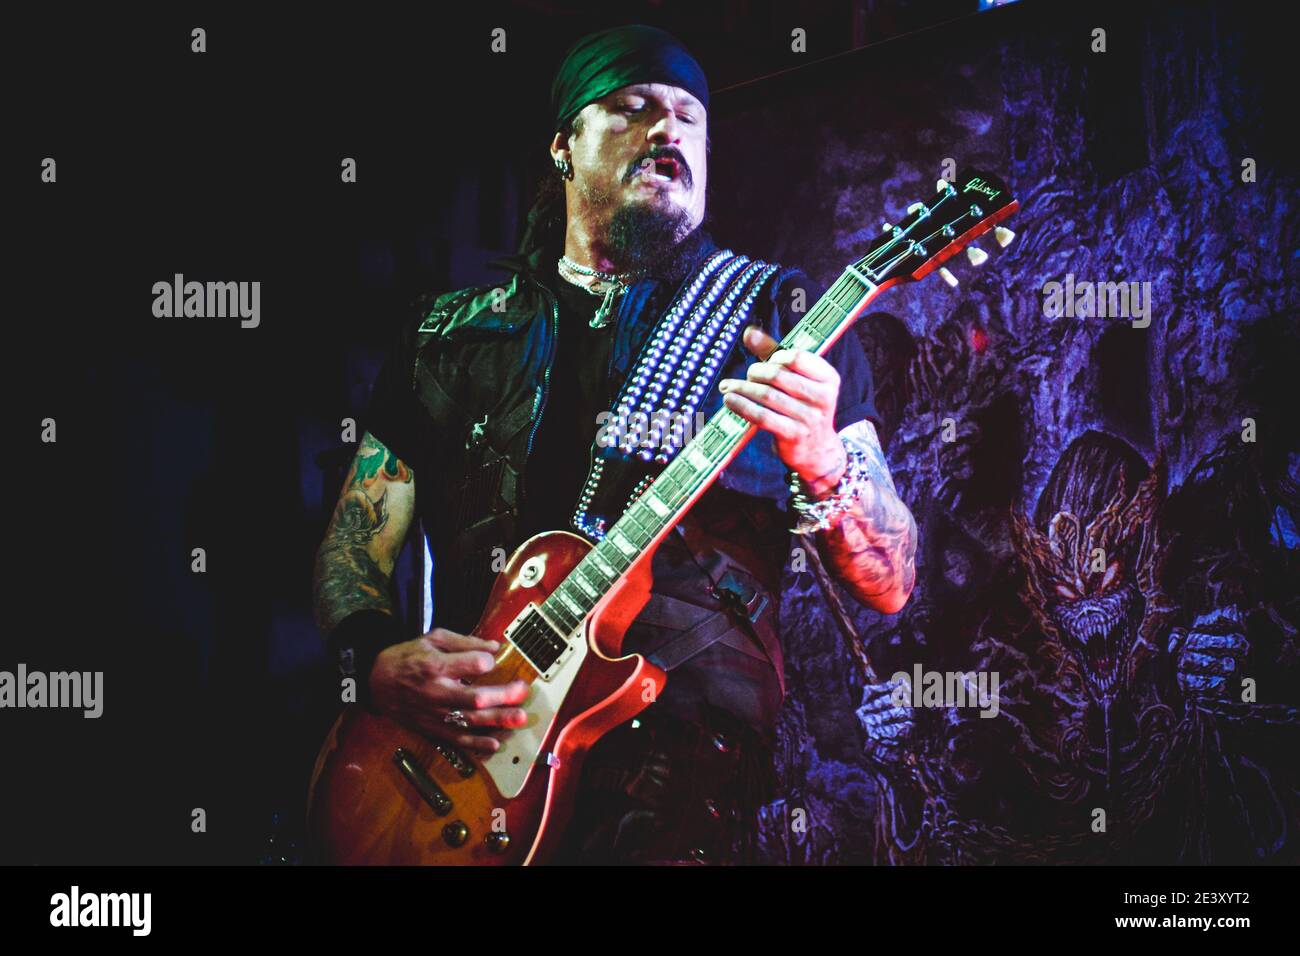 ITALY, ROMAGNANO SESIA, 2014: Jon Schaffer, guitarist of the  American heavy metal band Iced Earth, performing live on stage at the Rock N Roll Arena Stock Photo